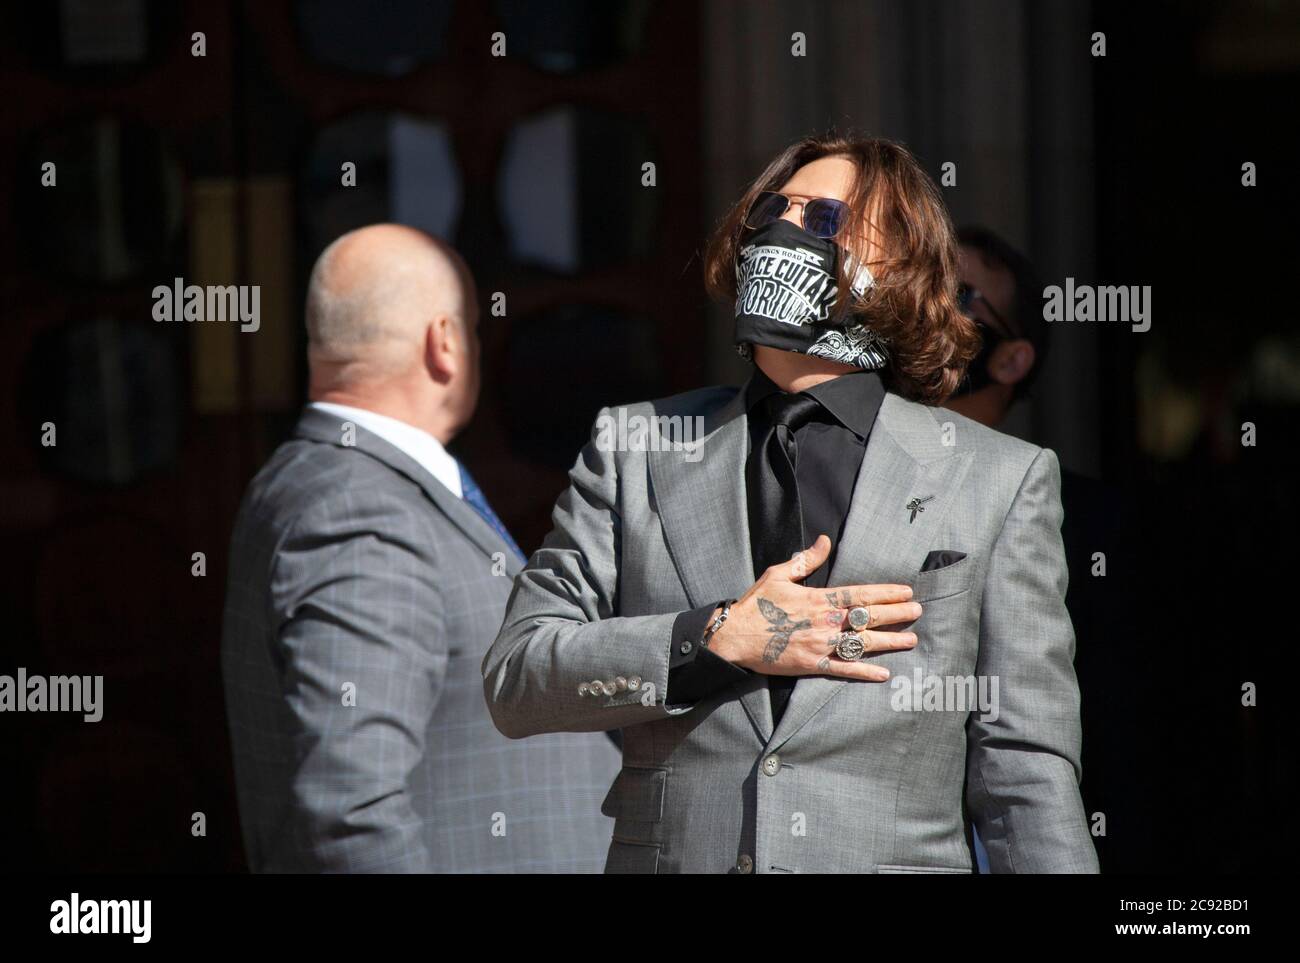 London, UK. 28th July 2020. Hollywood actor and musician, Johnny Depp, arrives at the high court, wearing a face scarf, on day 16 of his libel trial against The Sun's publishers NGN. Credit: Neil Atkinson/Alamy Live News Stock Photo